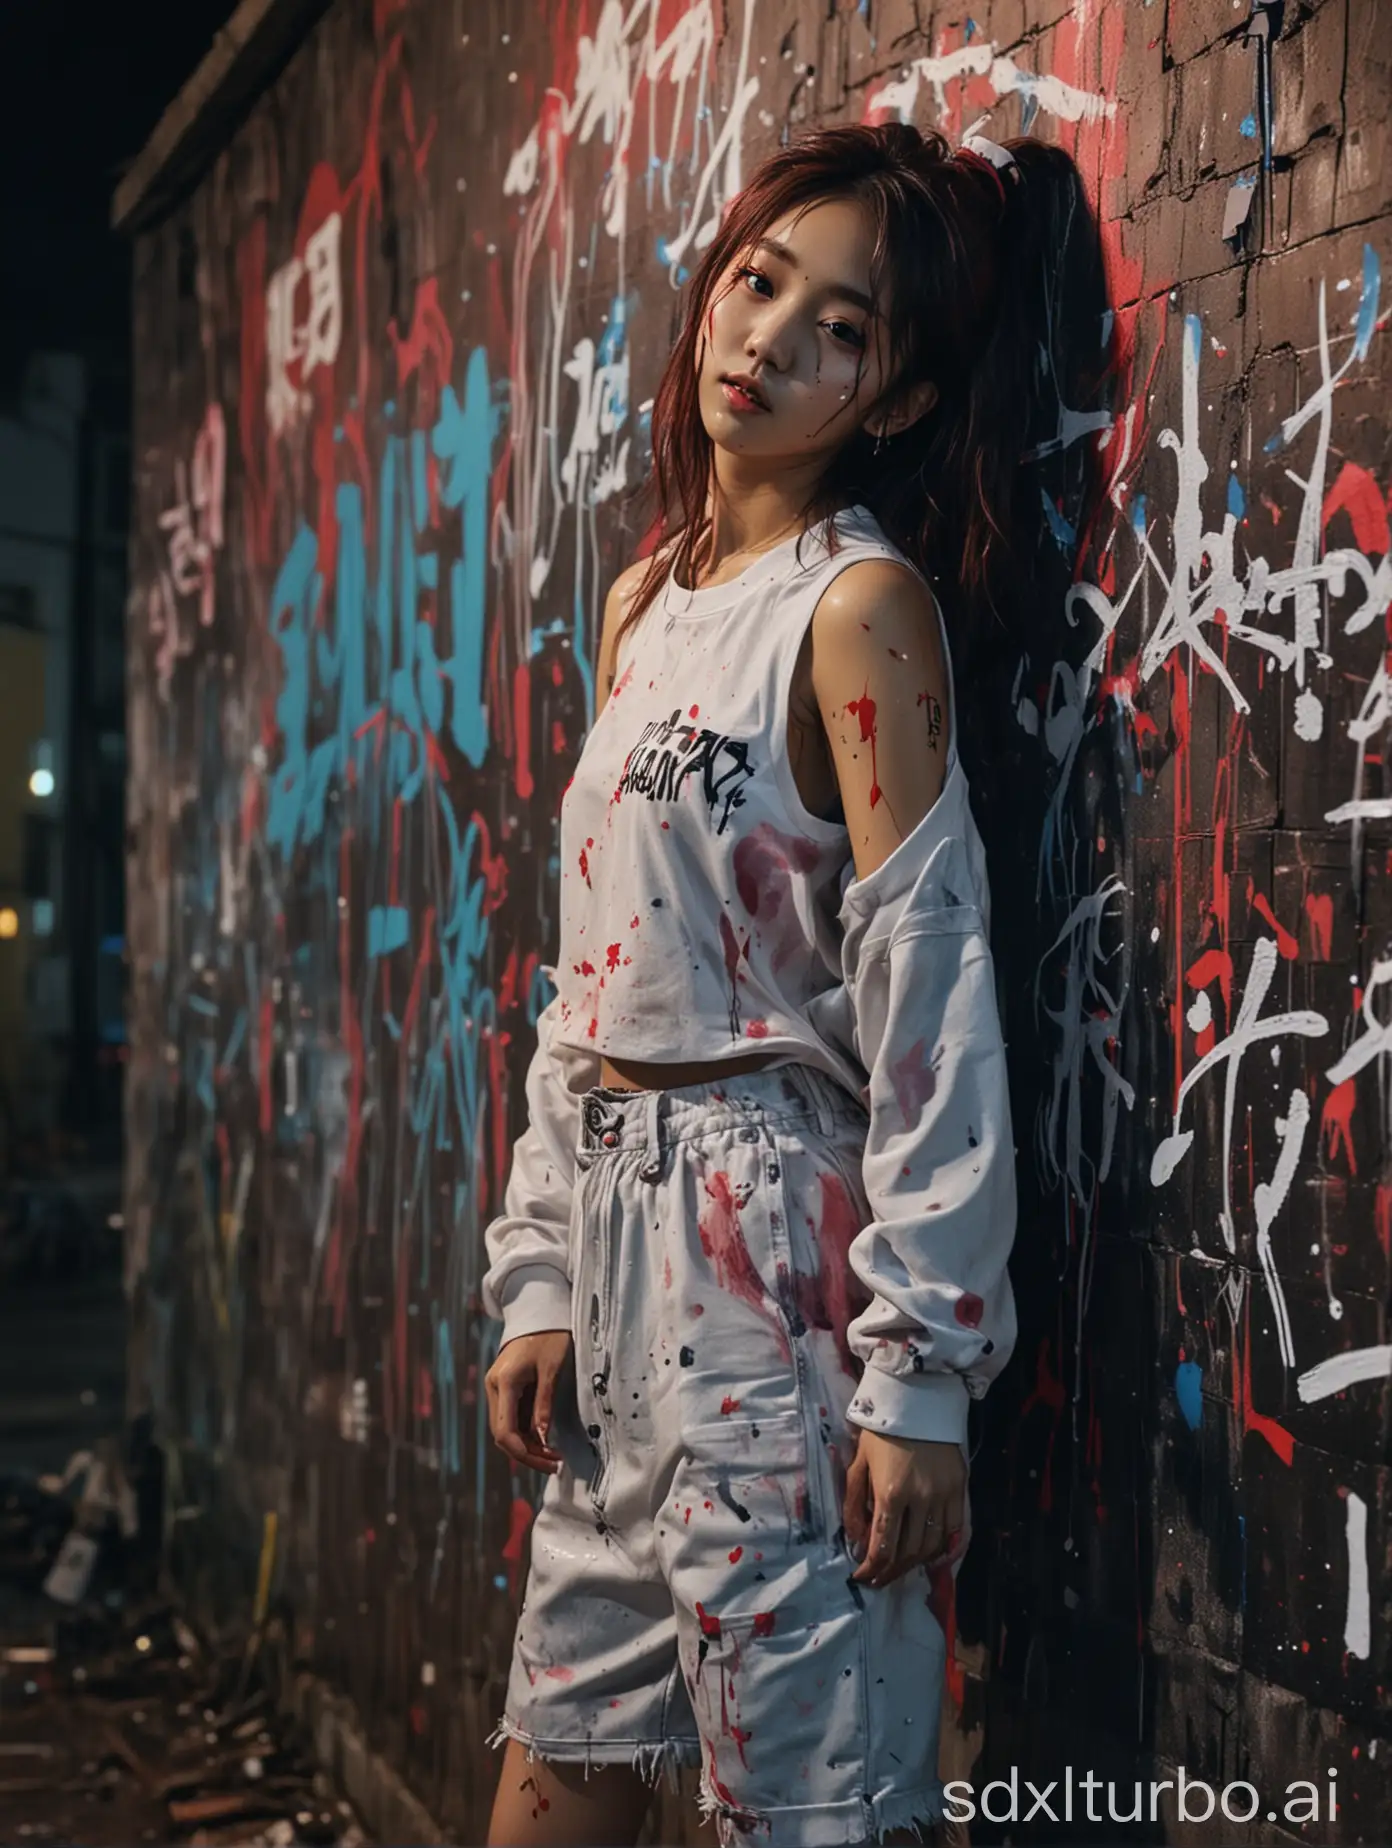 Korean girl graffiti artist, k-pop style, paint stained clothes, cinematic, night